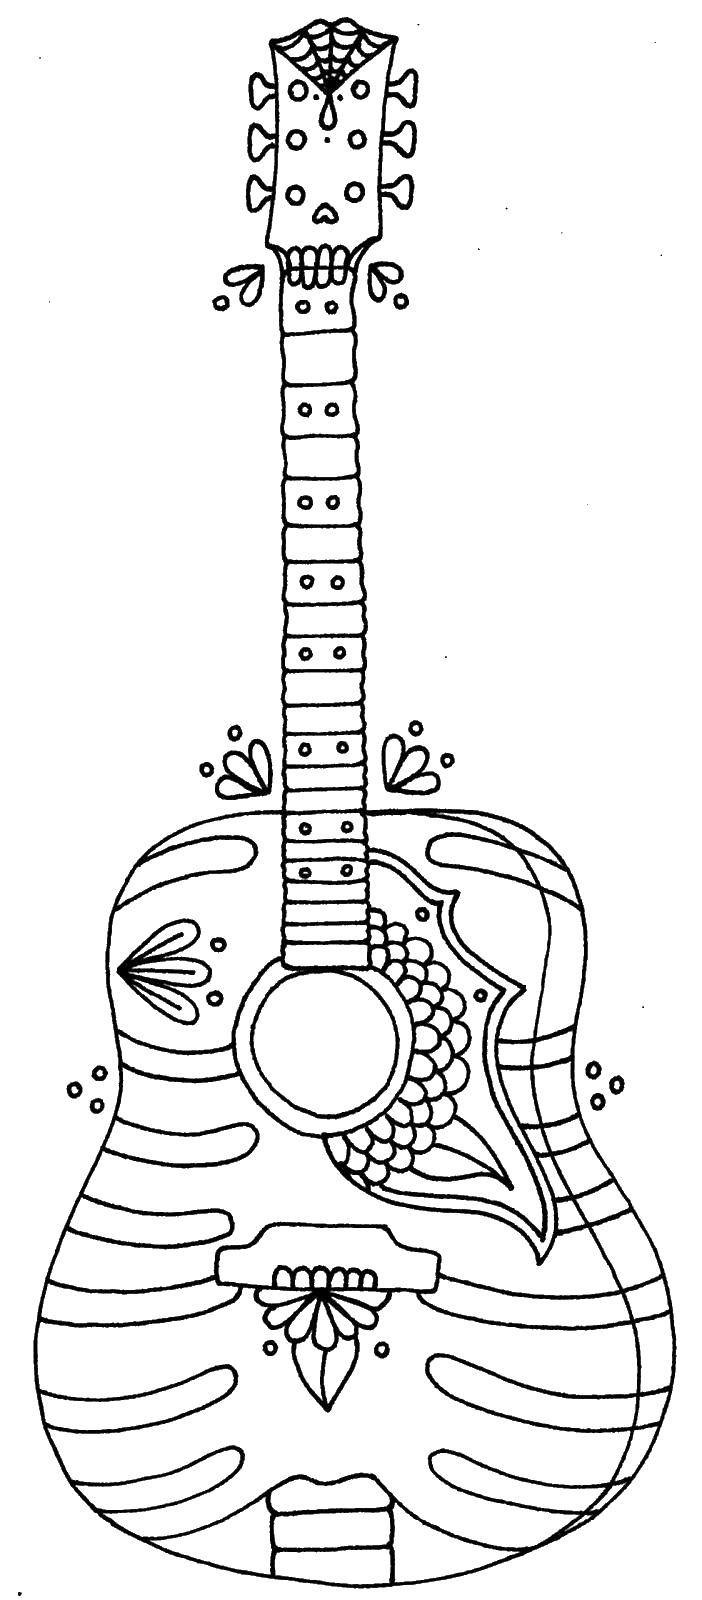 Coloring Guitar in pictures. Category Musical instrument. Tags:  musical instruments, guitar.